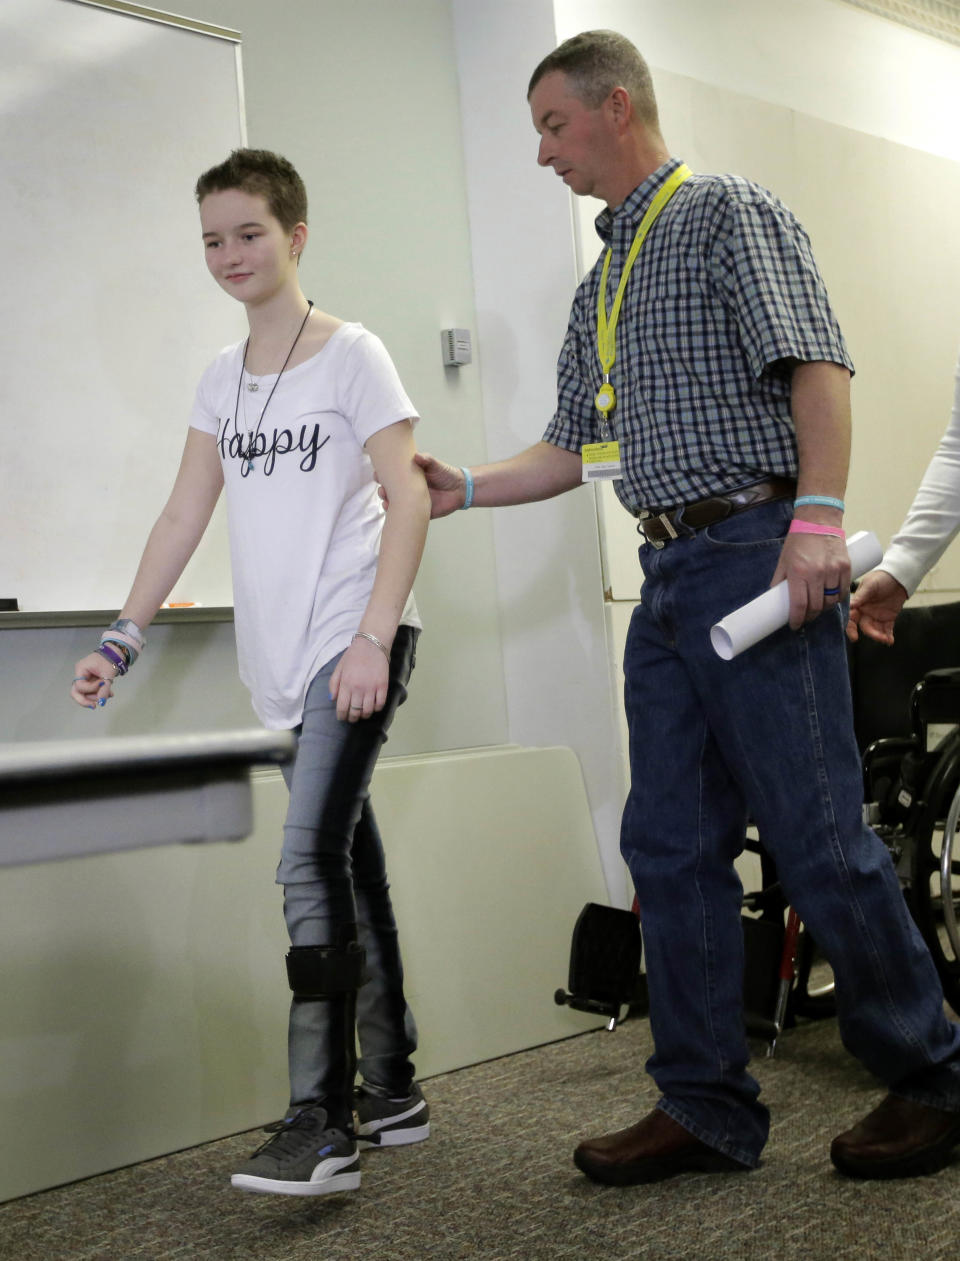 FILE - In this April 20, 2017, file photo, Matt Turner aids his daughter Deserae Turner, as they arrive for a news conference at Primary Children's Hospital, in Salt Lake City. Turner, a Utah high school student who survived a gunshot wound to the head was named homecoming queen by her classmates. Turner was found in a ditch after being shot in the back of the head and left for dead by two classmates in February 2017. (AP Photo/Rick Bowmer, File)